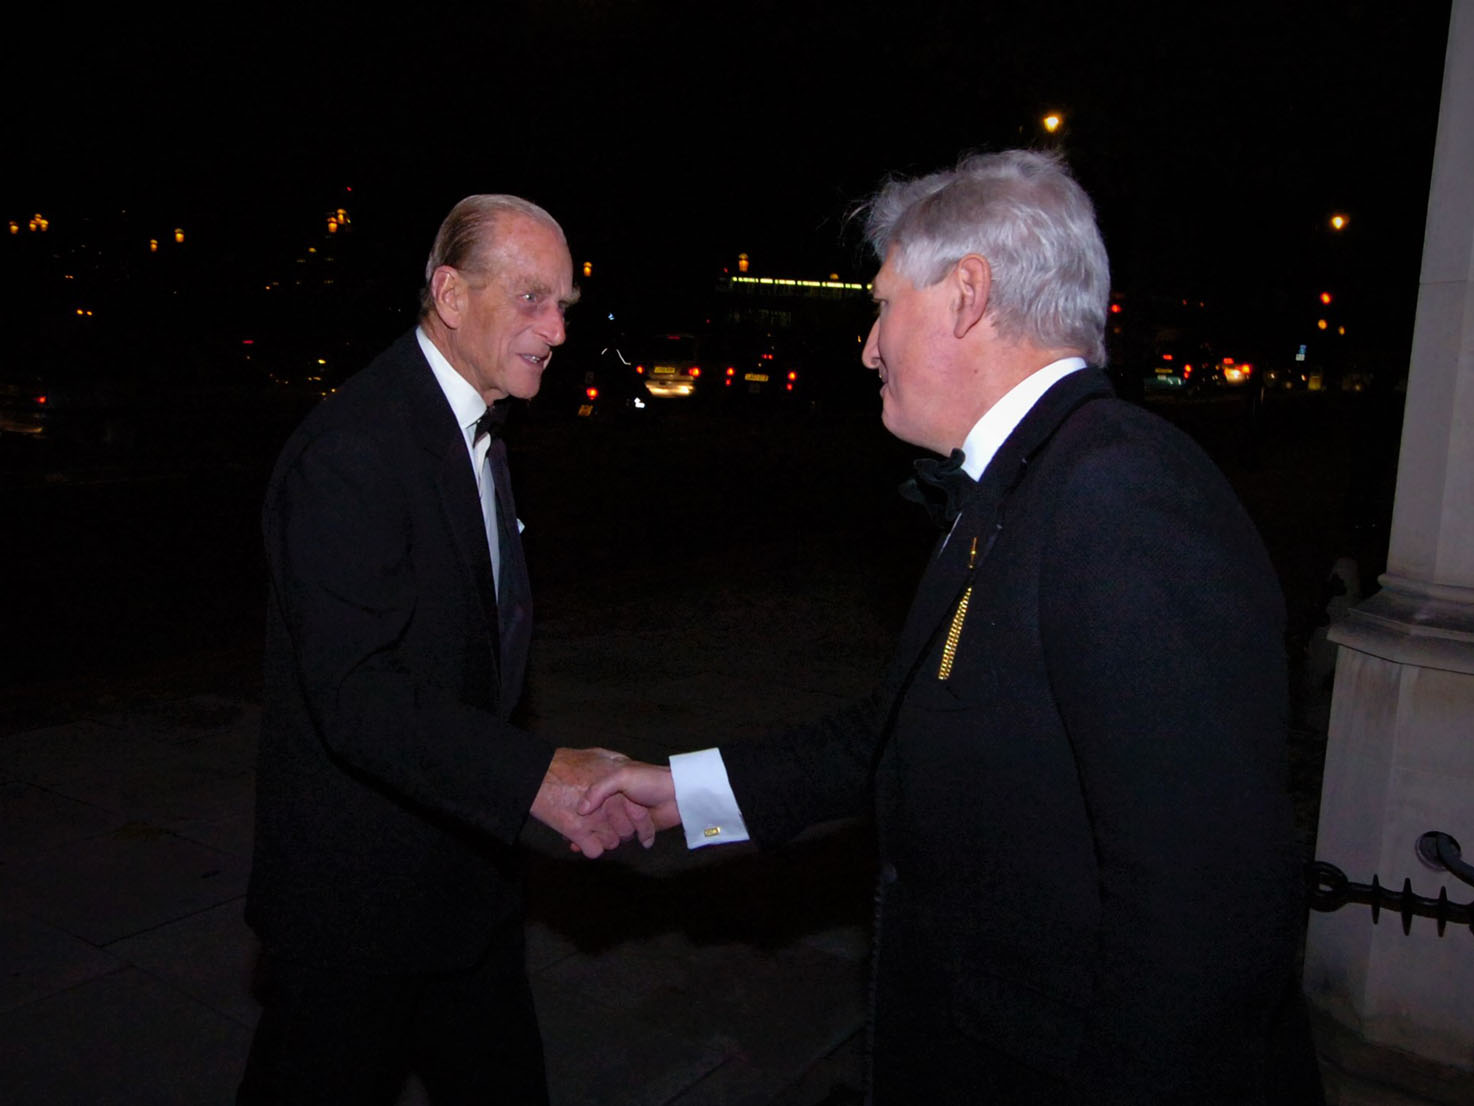 Duke of Edinburgh shaking hands with Dr. Moran outside of Crosby Moran Hall in the evening.